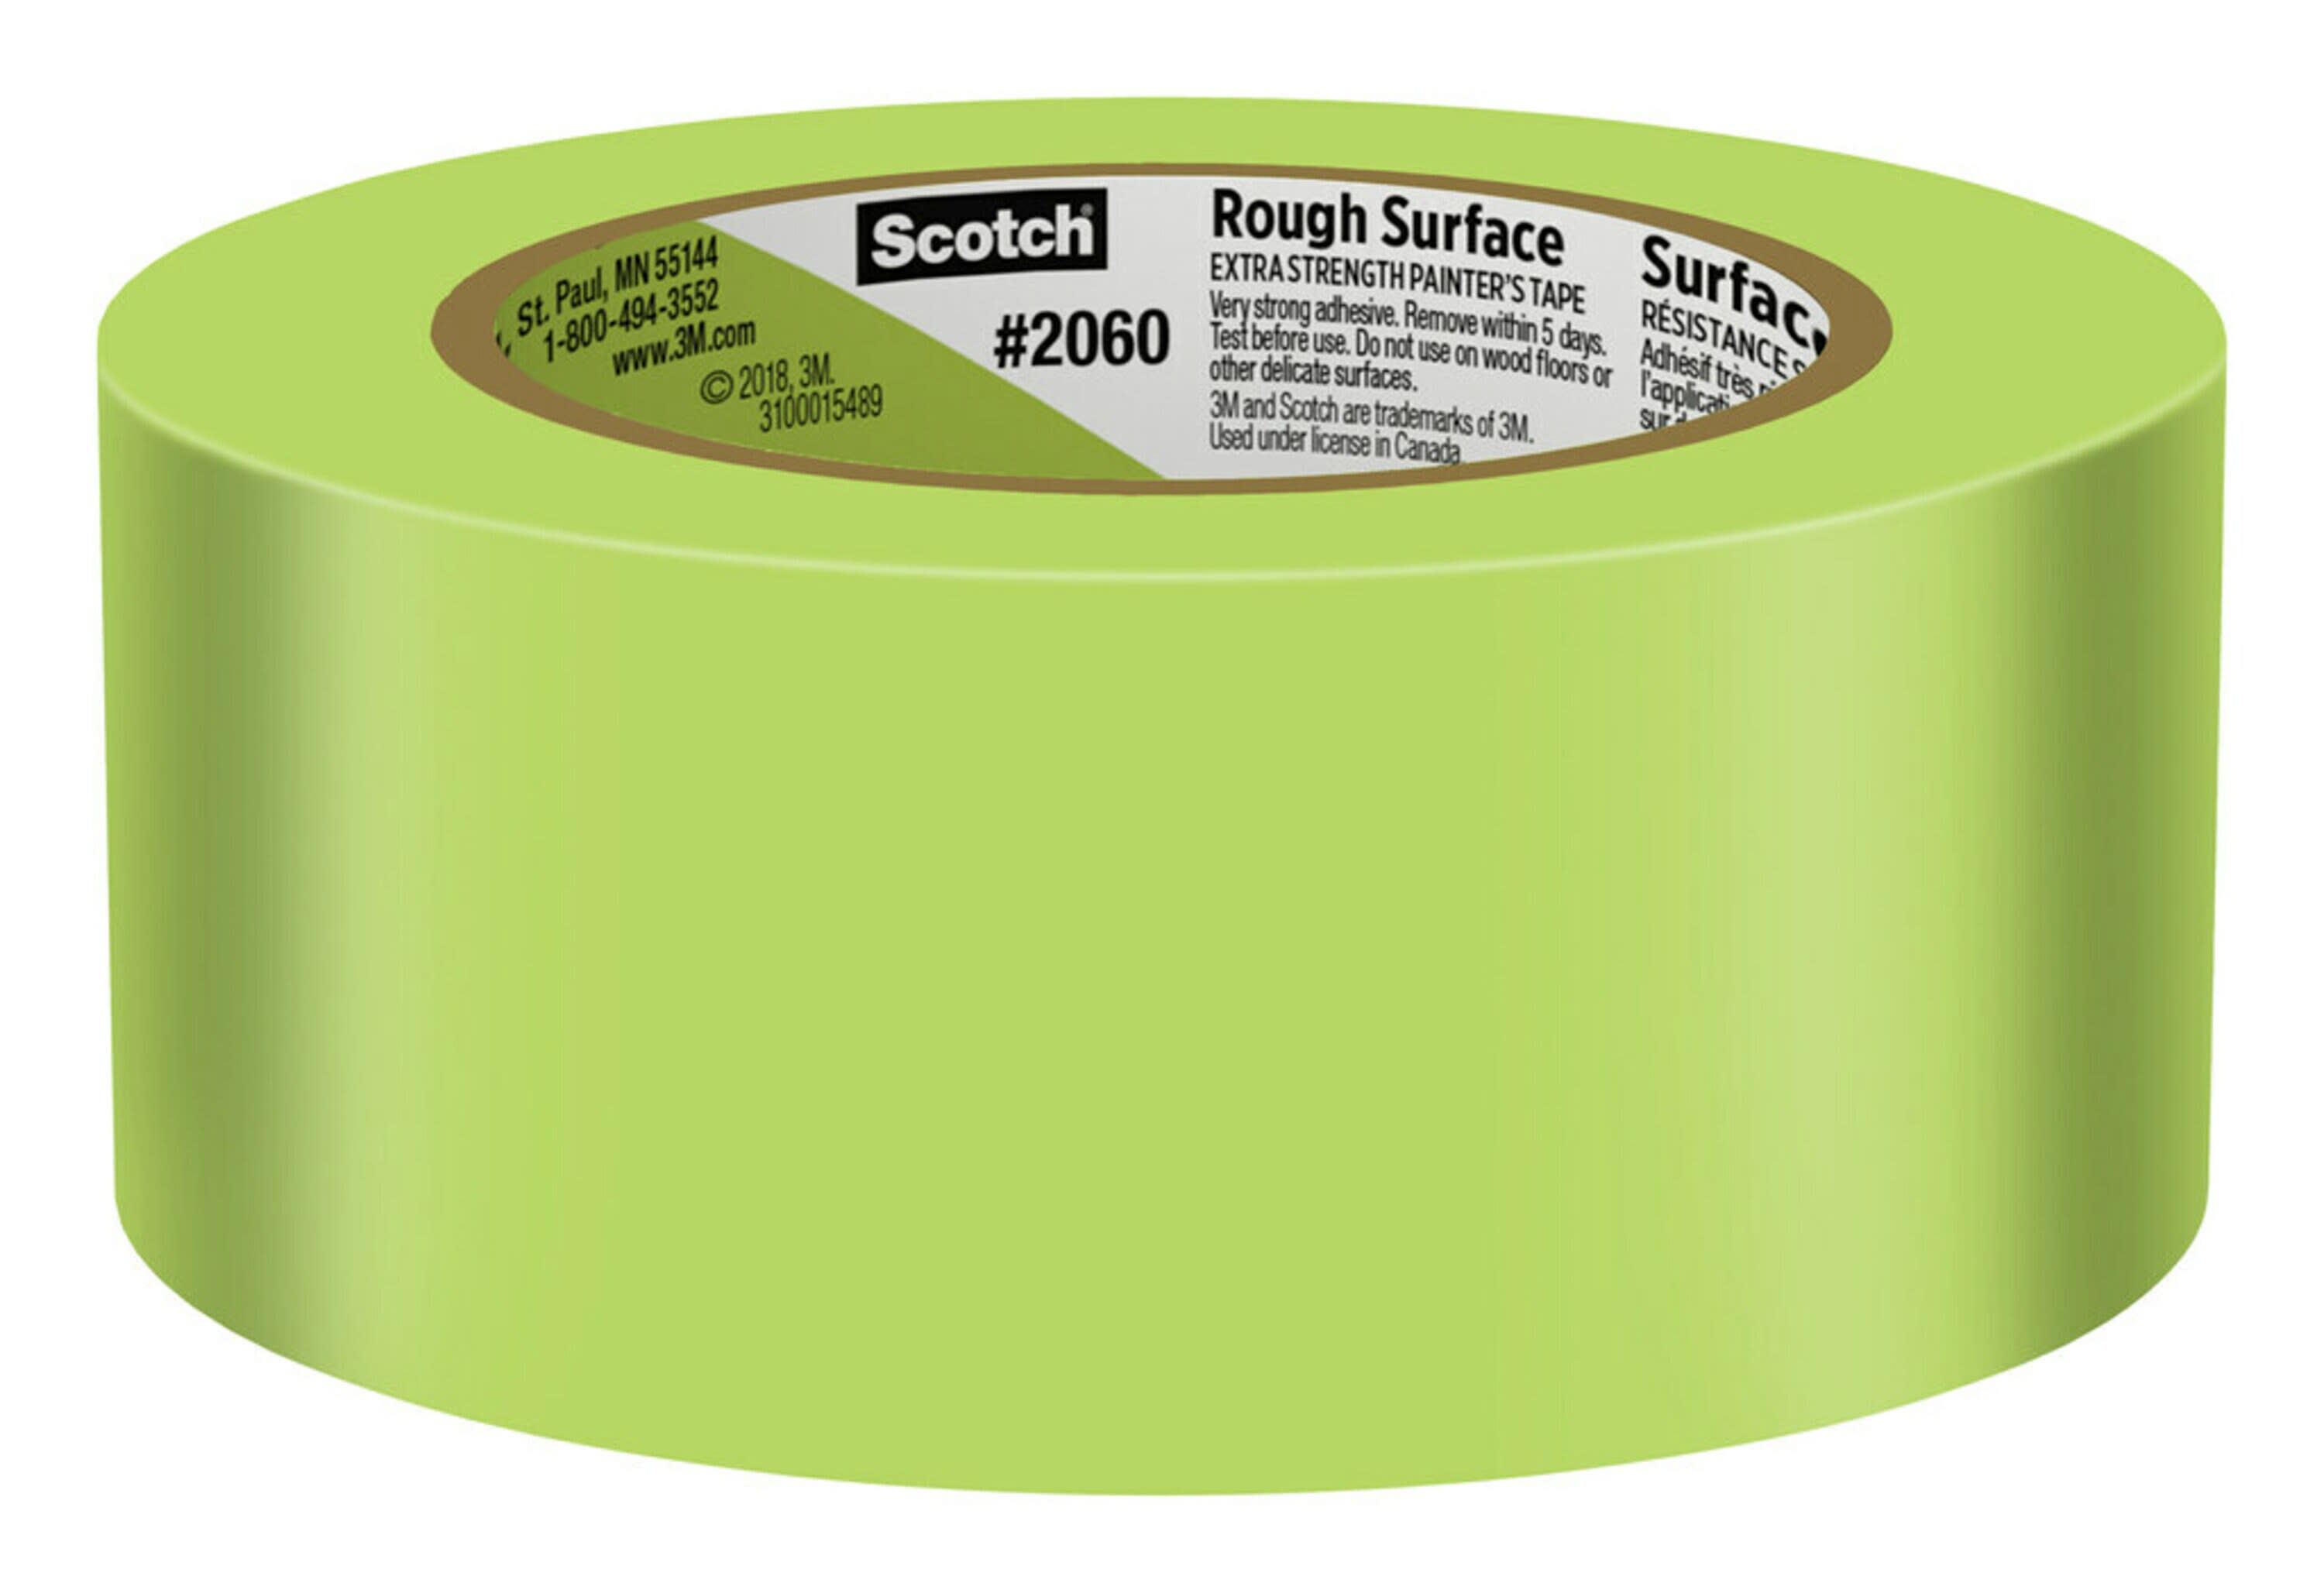 Scotch Rough Surface Painters Tape, Green, 1.88 inches x 60.1 yards, 1 Roll - image 4 of 22